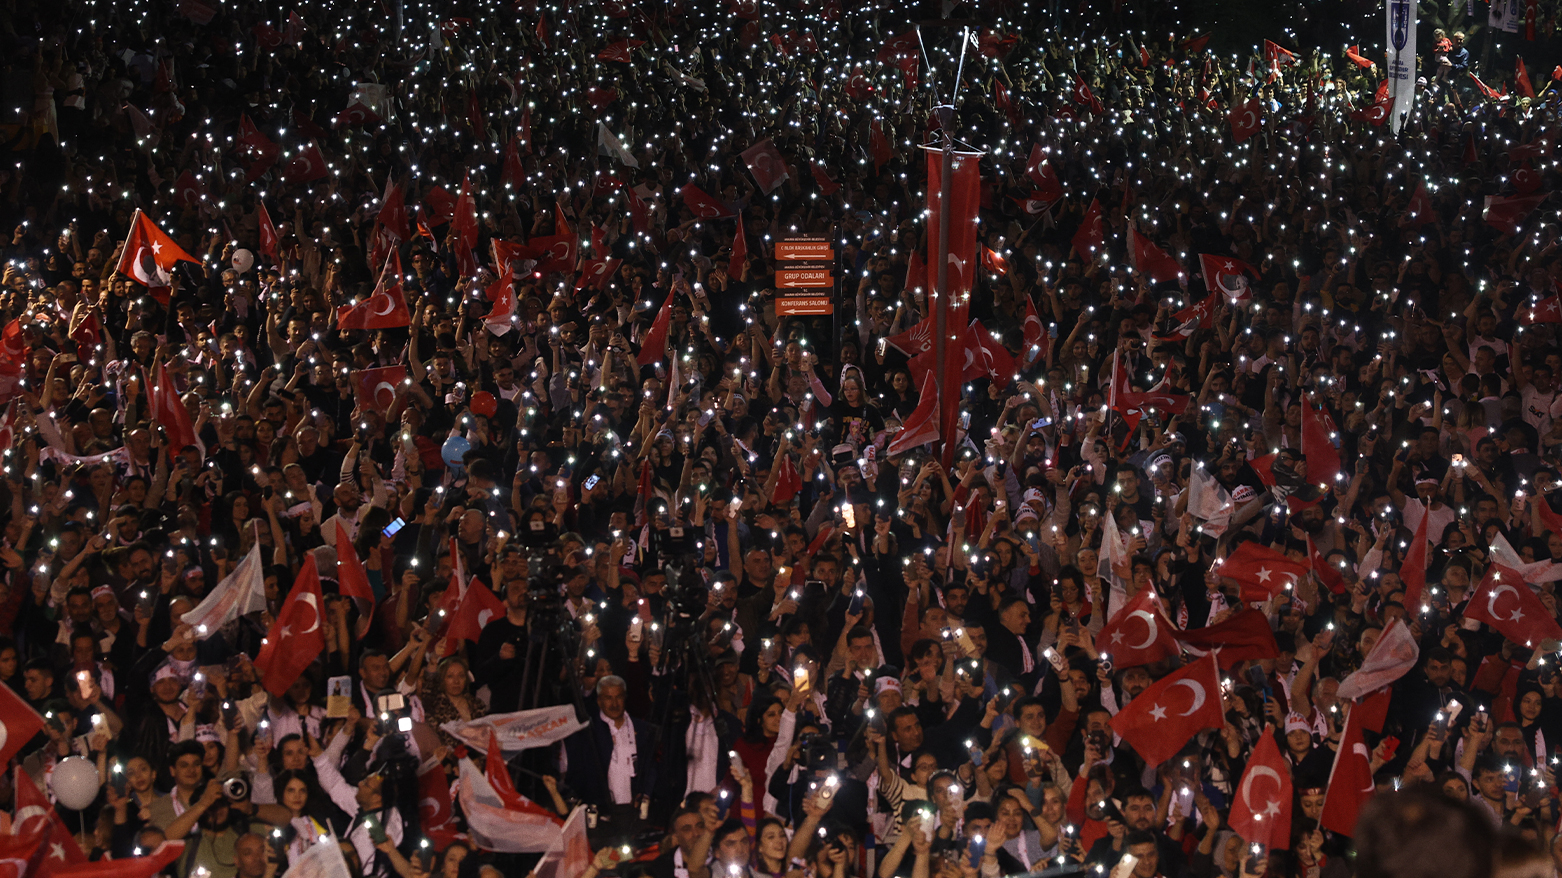 Erdogan sees turning point for Turkey after poll drubbing